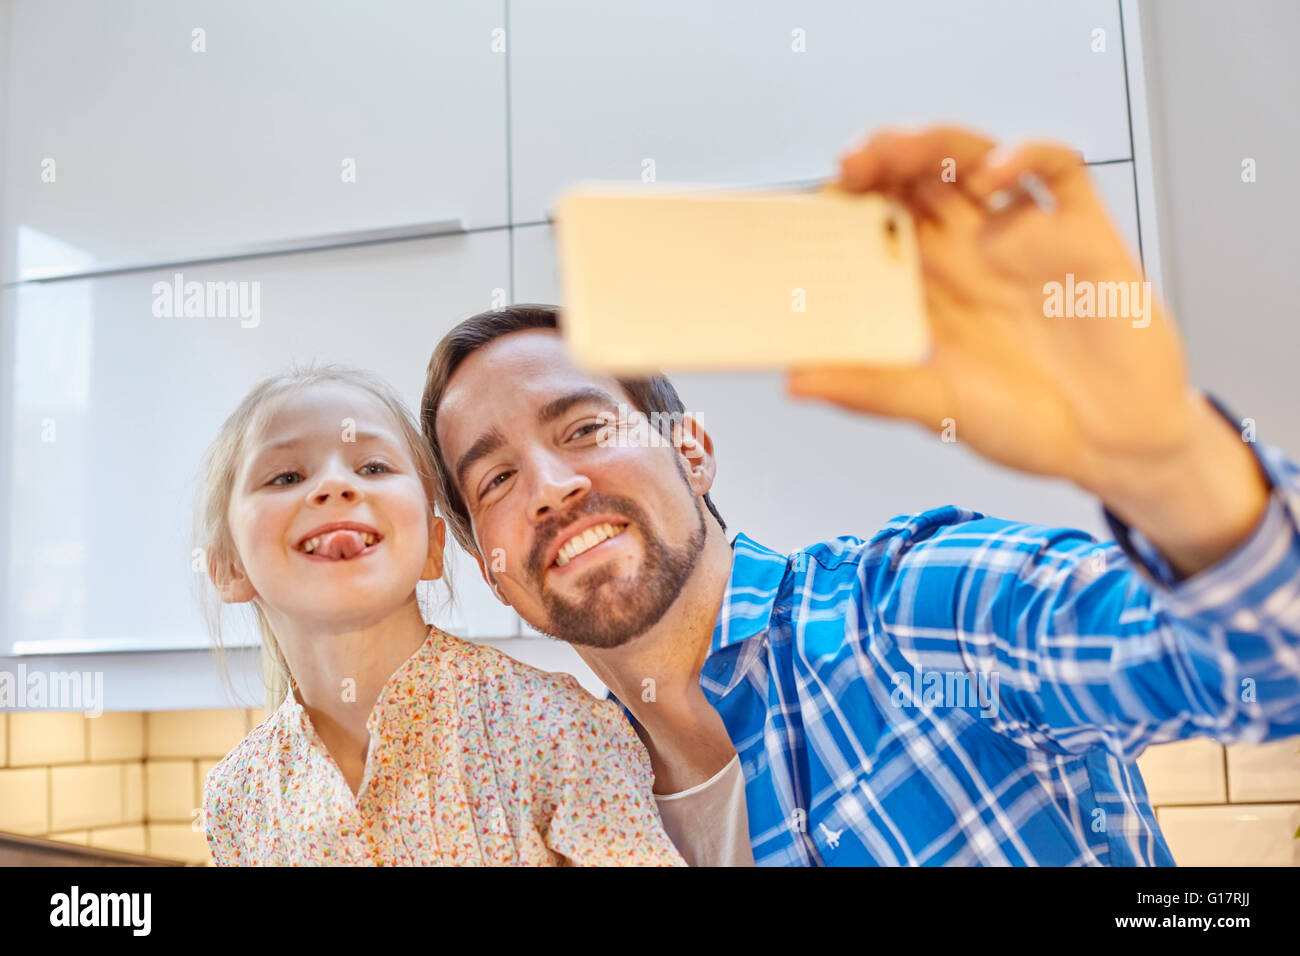 Father and daughter taking selfie in kitchen Stock Photo